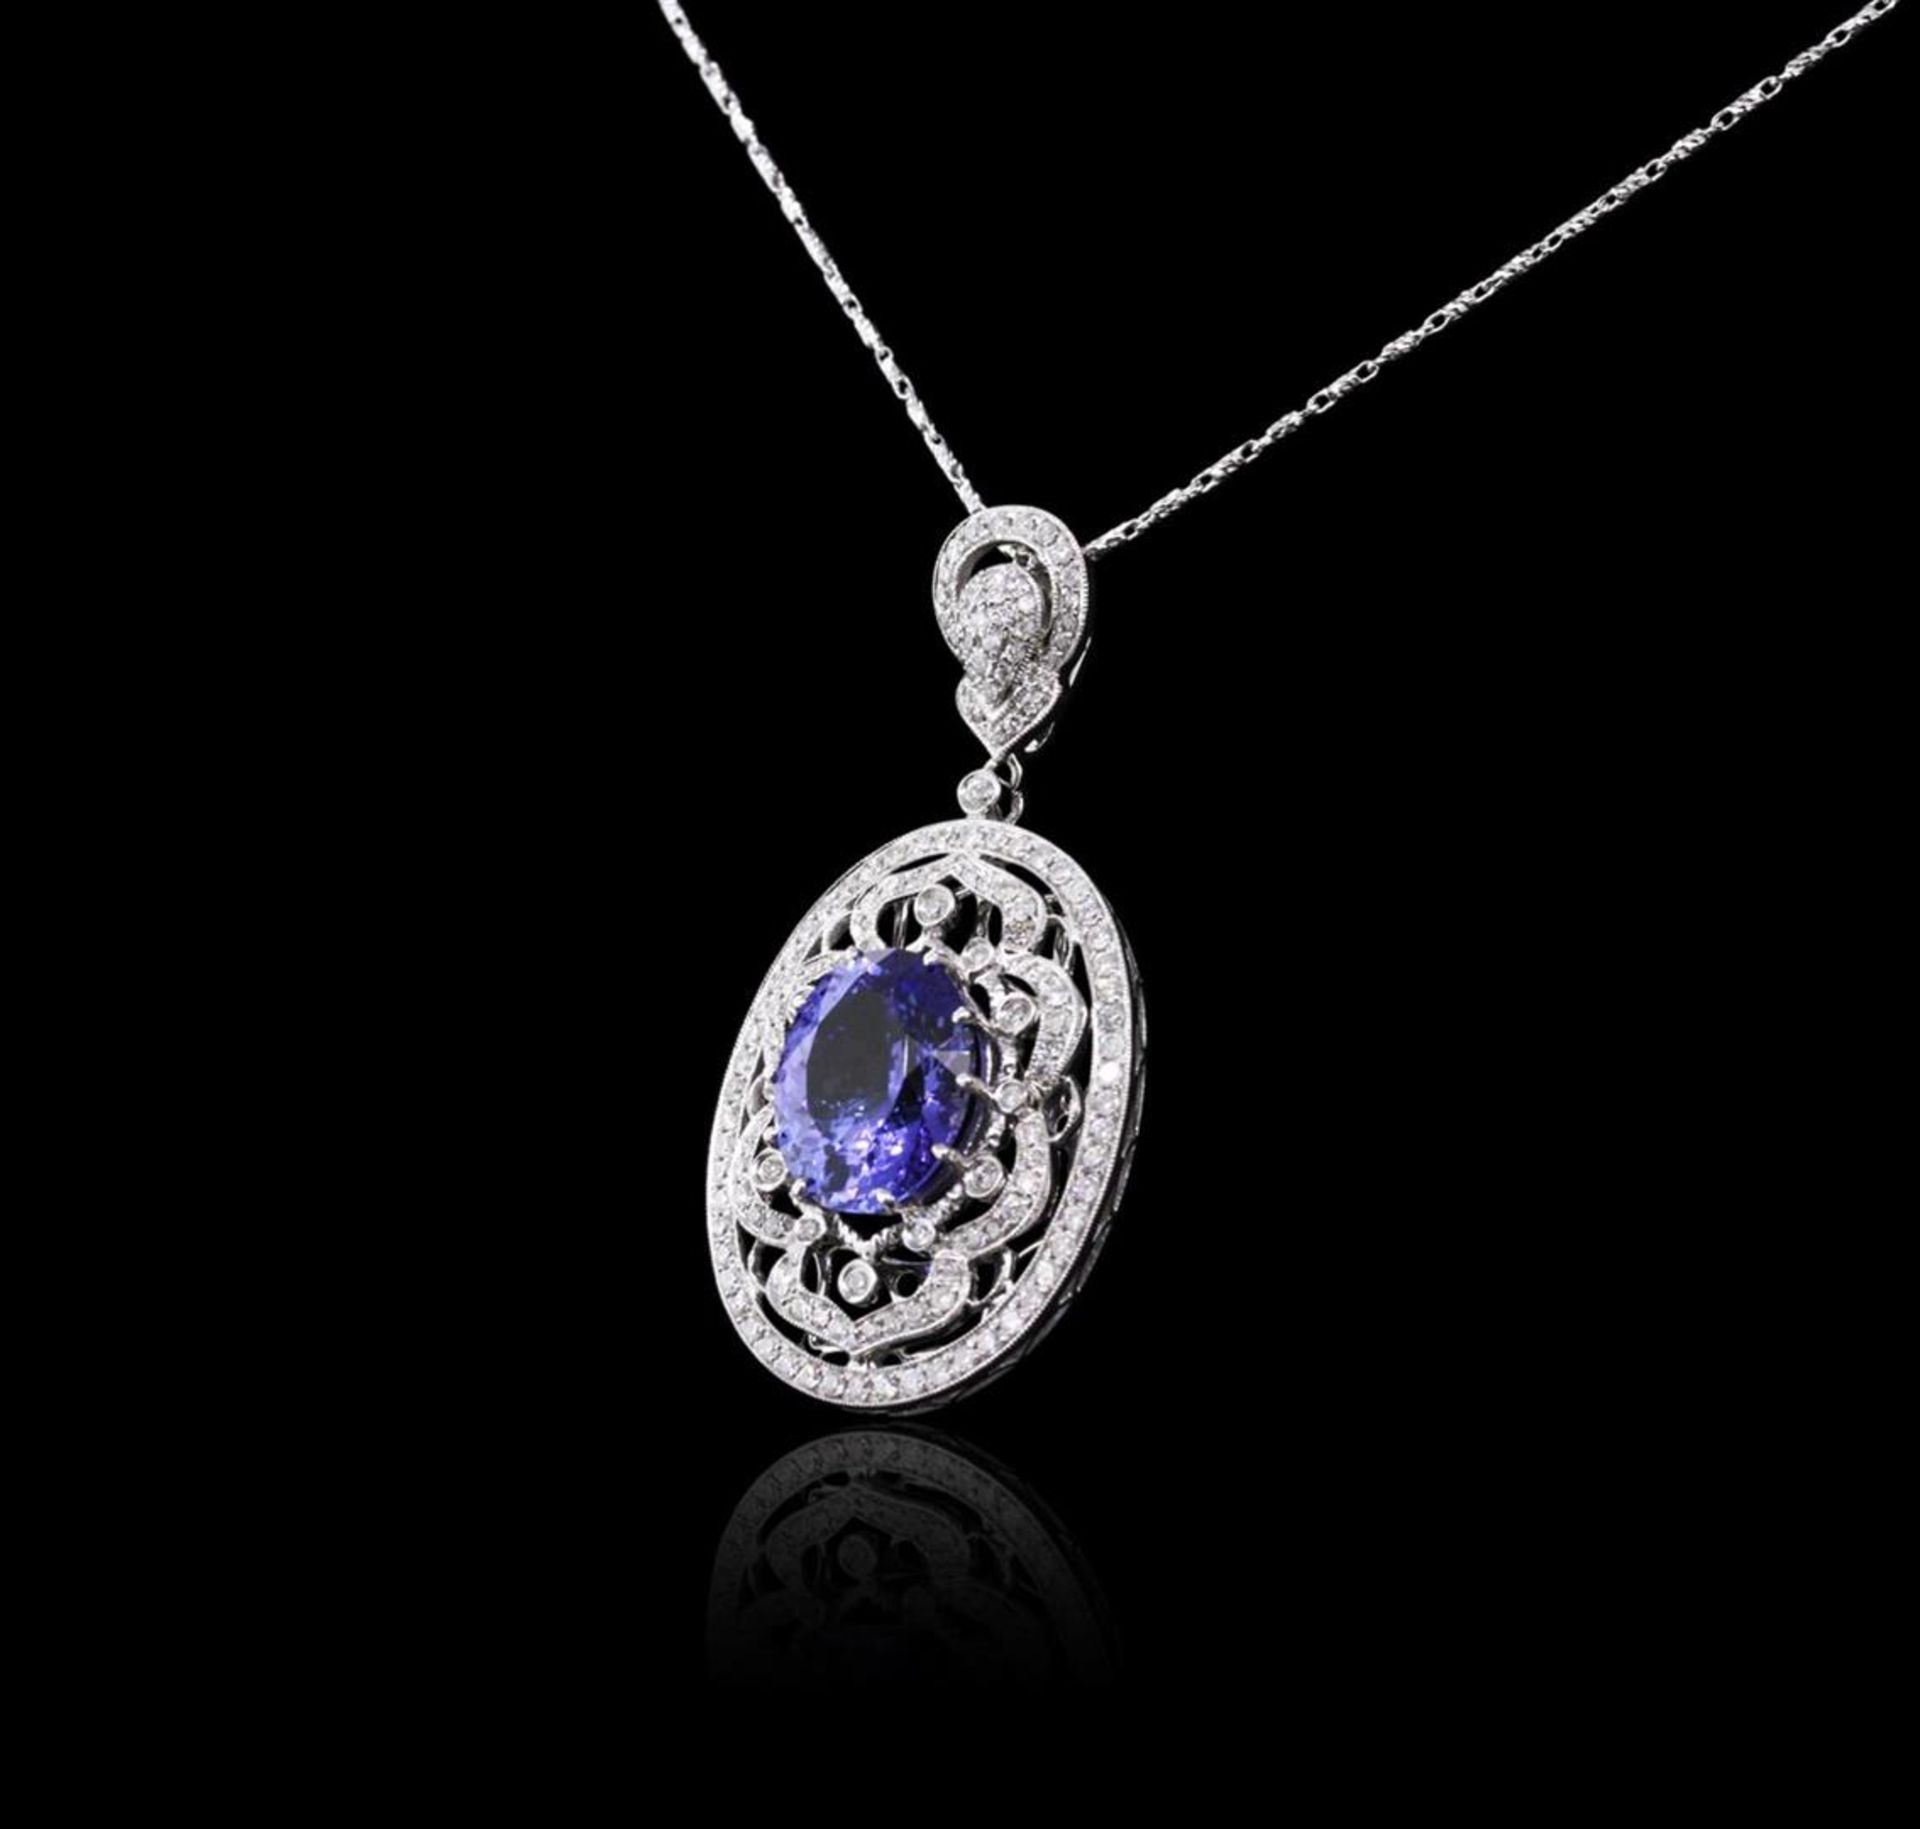 14KT White Gold 8.01 ctw Tanzanite and Diamond Pendant With Chain - Image 6 of 8